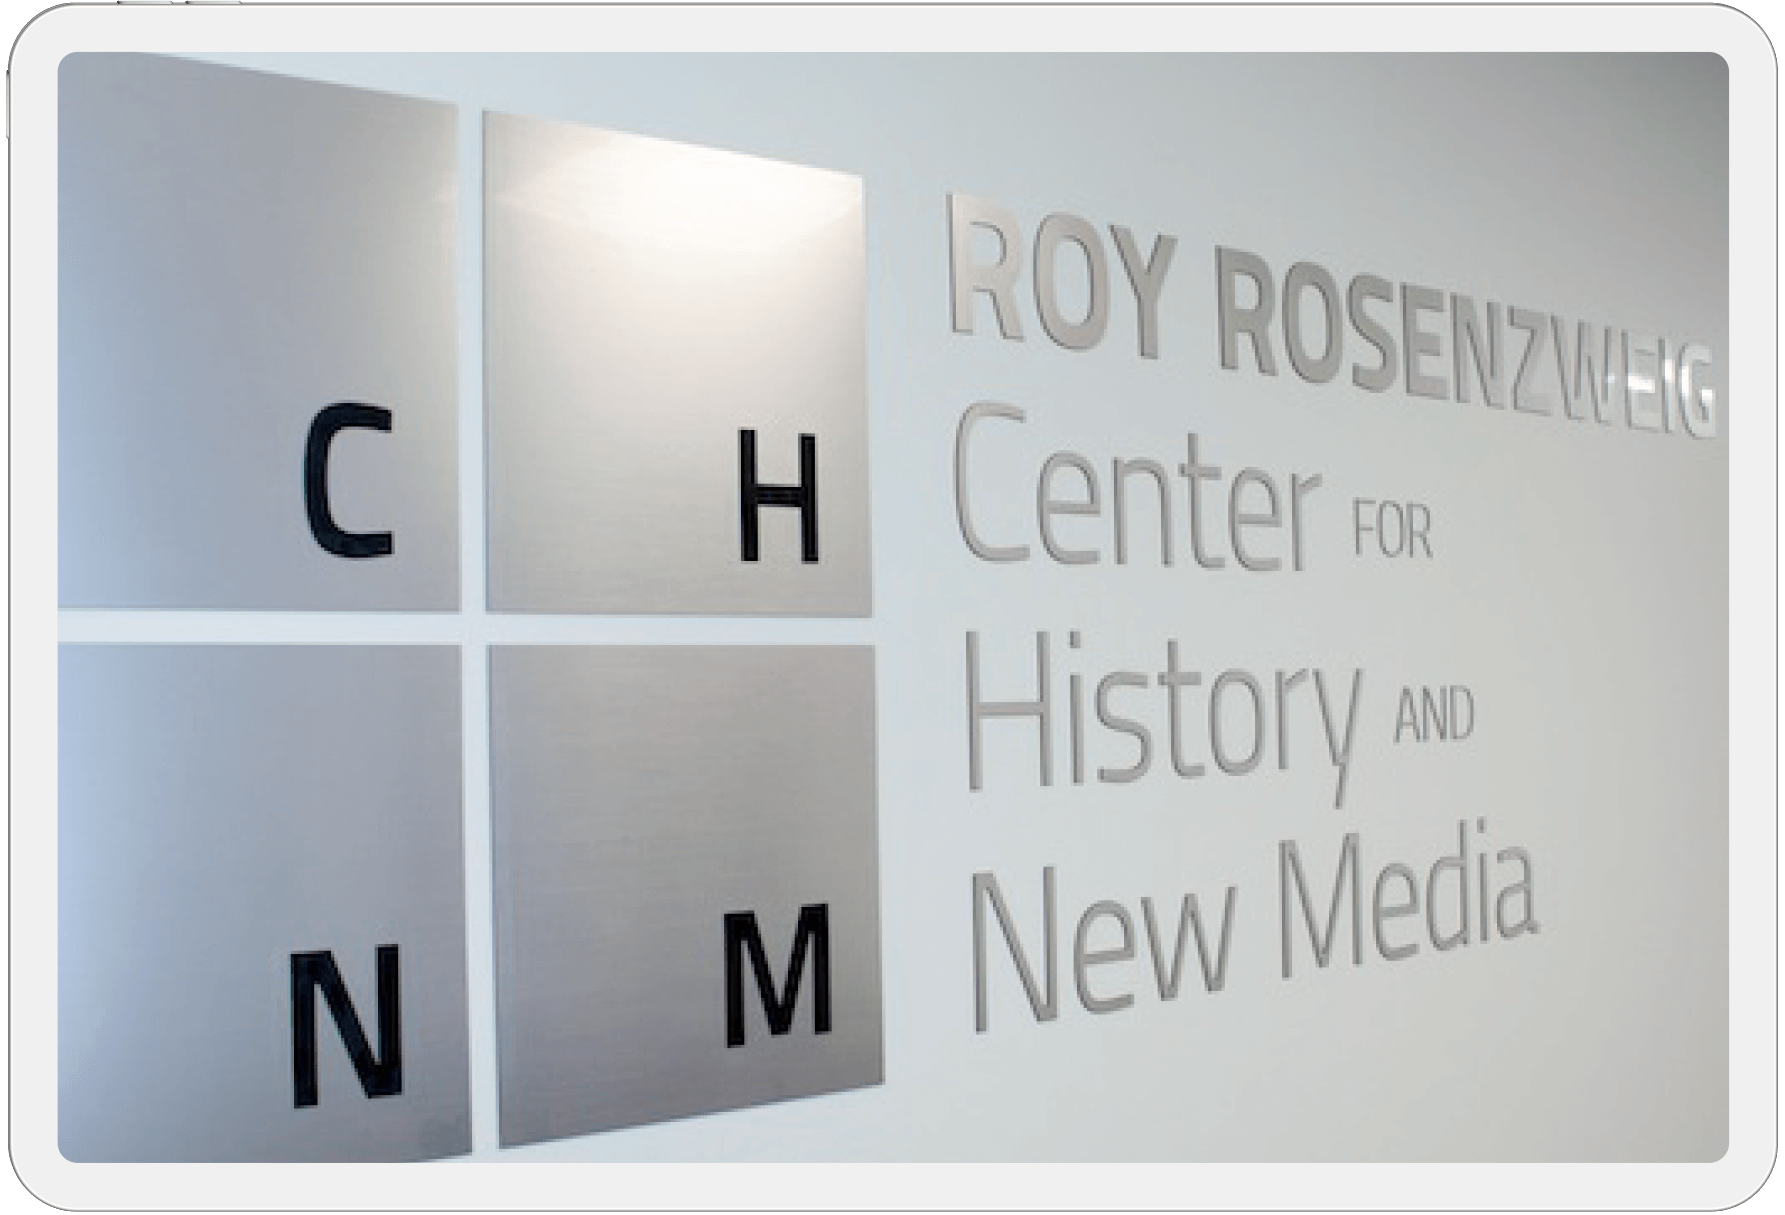 Metal sign version of RRCHNM's logo outside the CHNM office space.